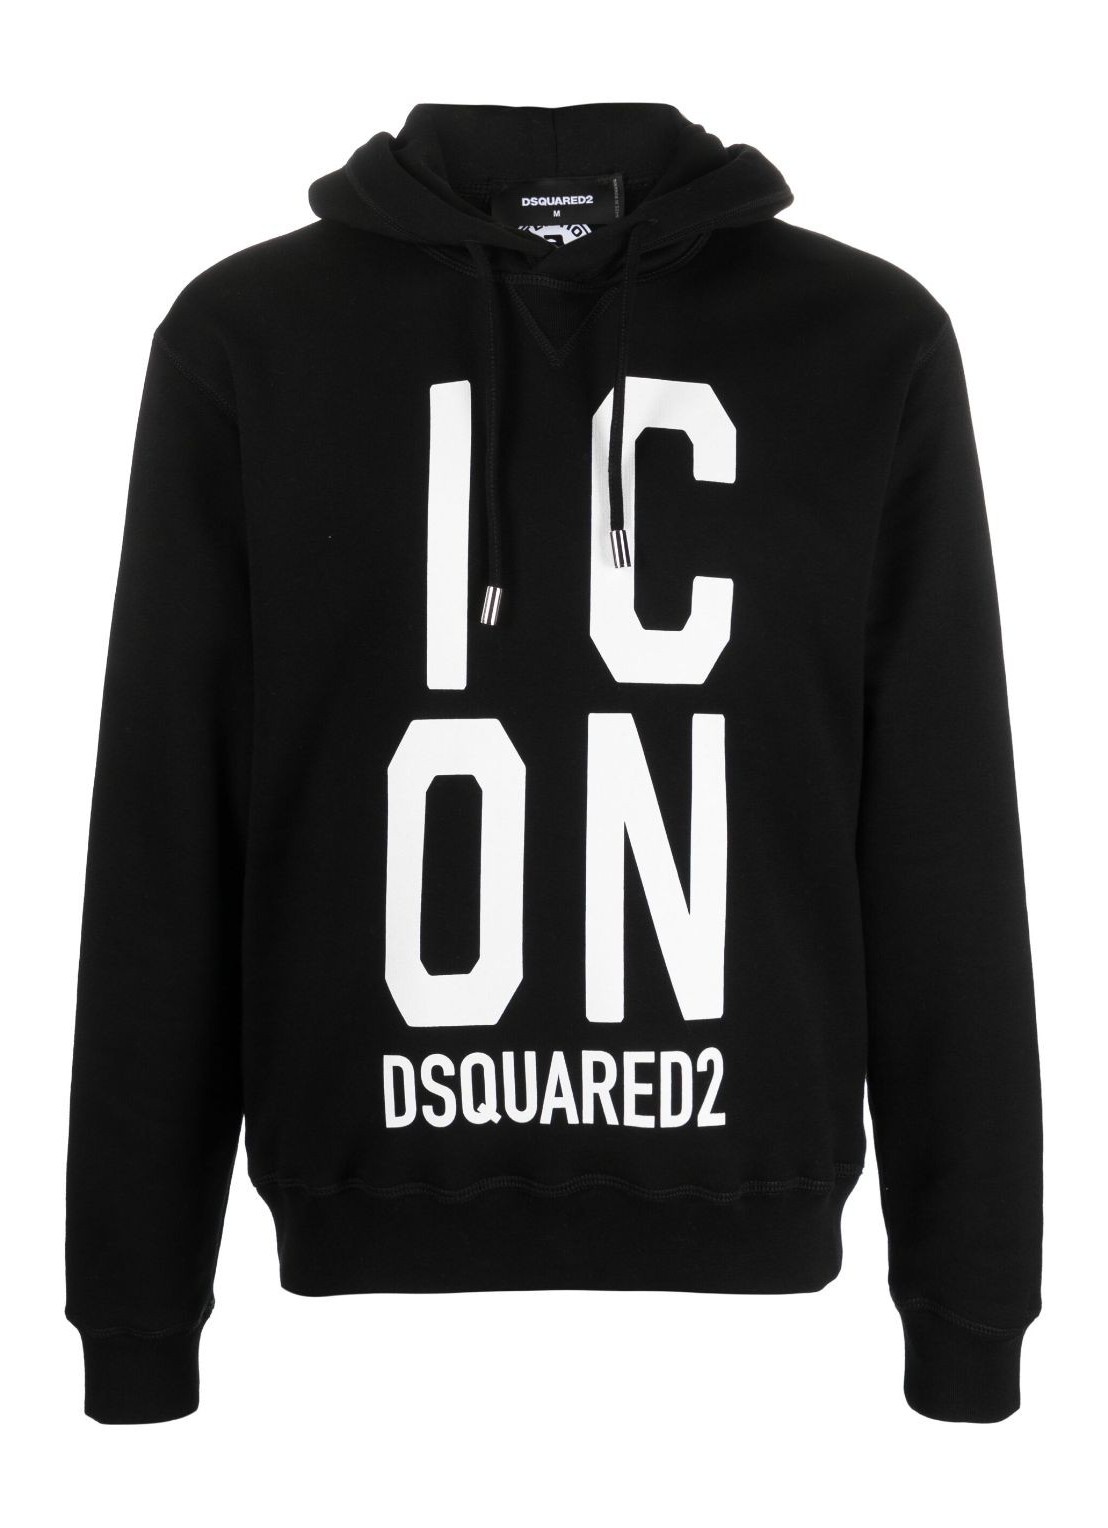 Sudadera dsquared sweater man icon squared cool fit hoodie s79gu0108s25516 900 talla S
 